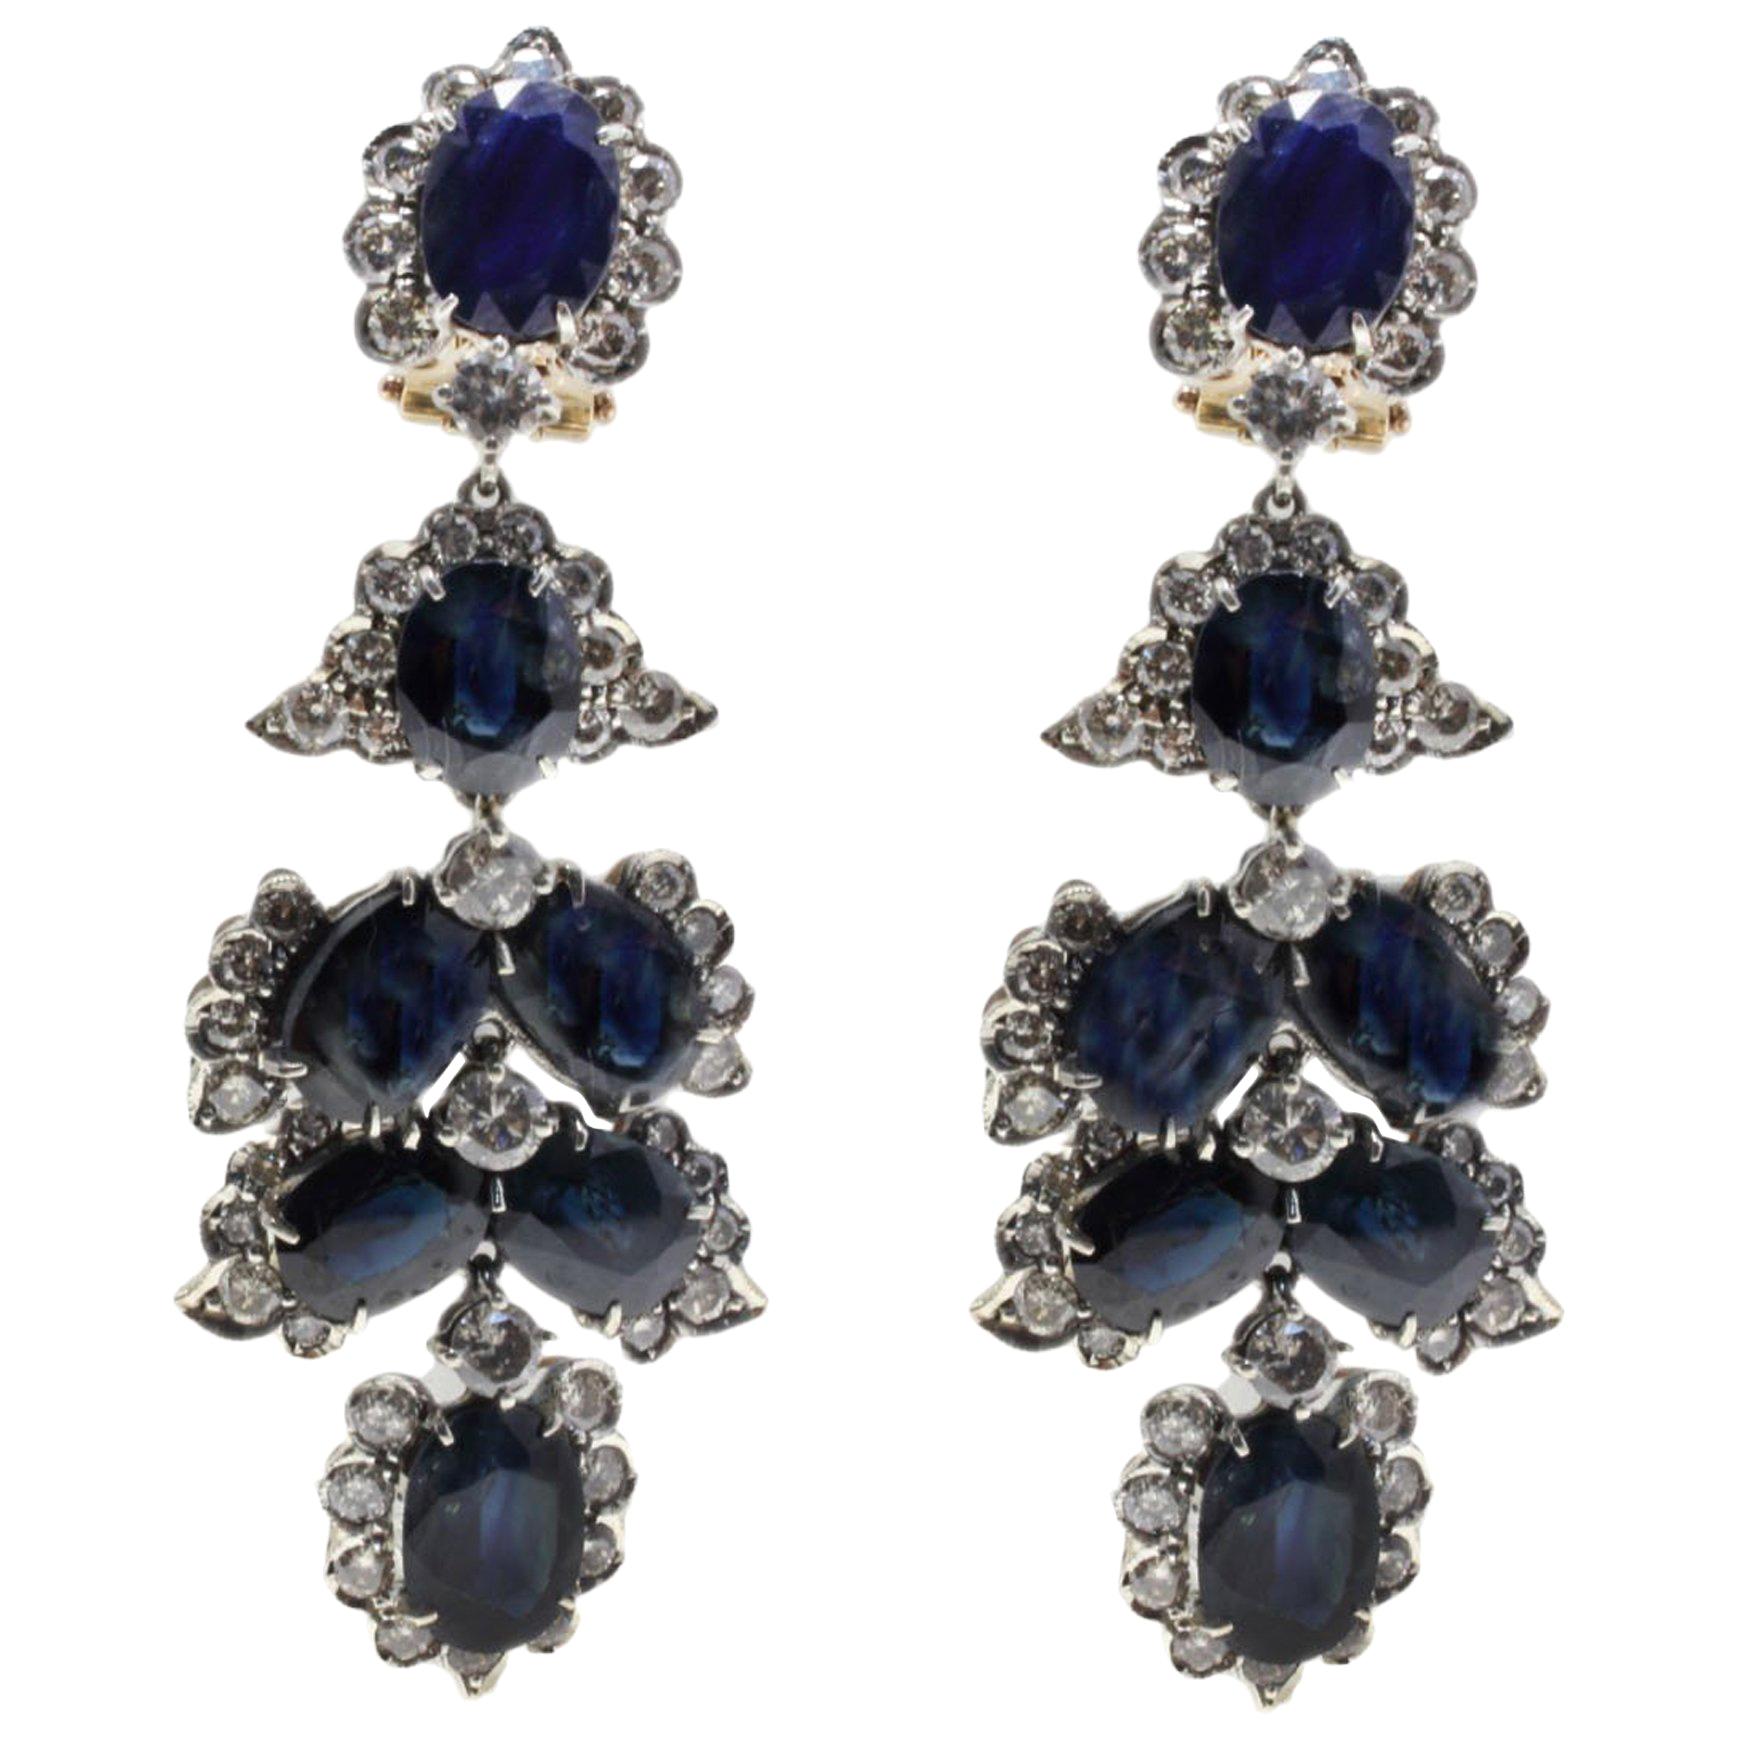 Diamonds and Sapphires Chandelier Rose Gold and Silver Earrings